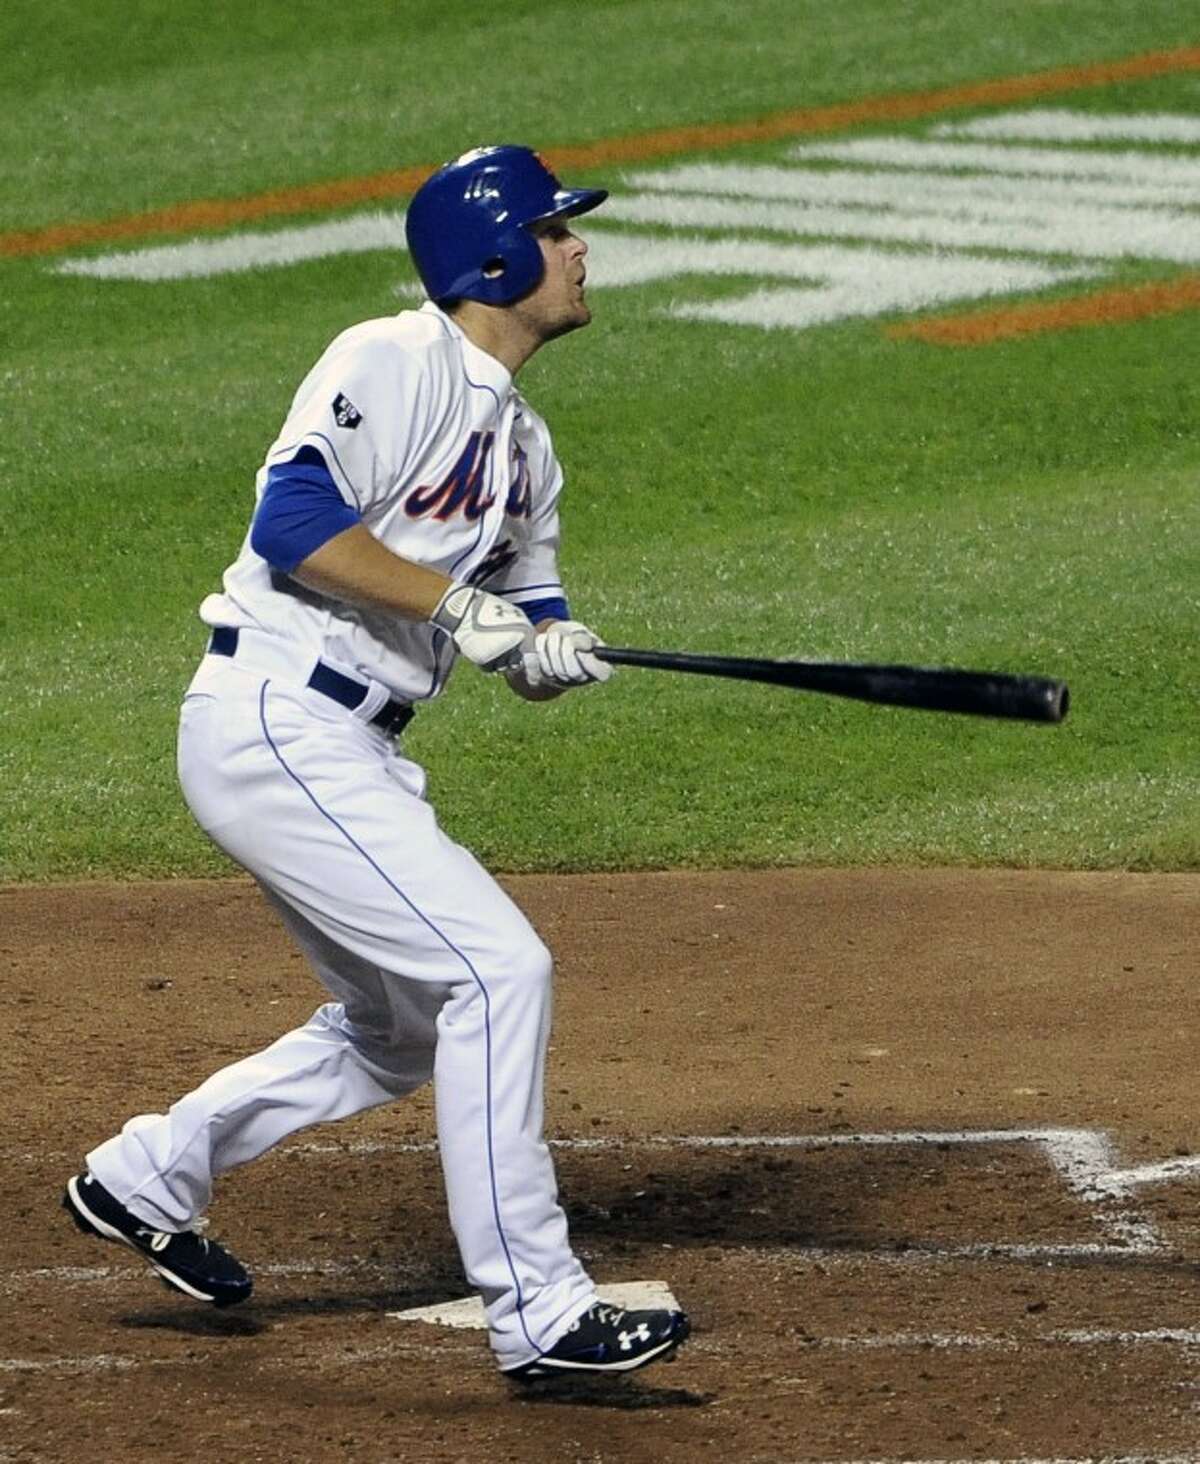 New York Mets' Lucas Duda watches his three-run home run off St. Louis Cardinals starting pitcher Adam Wainwright in the sixth inning of a baseball game on Friday, June 1, 2012, at Citi Field in New York. (AP Photo/Kathy Kmonicek)